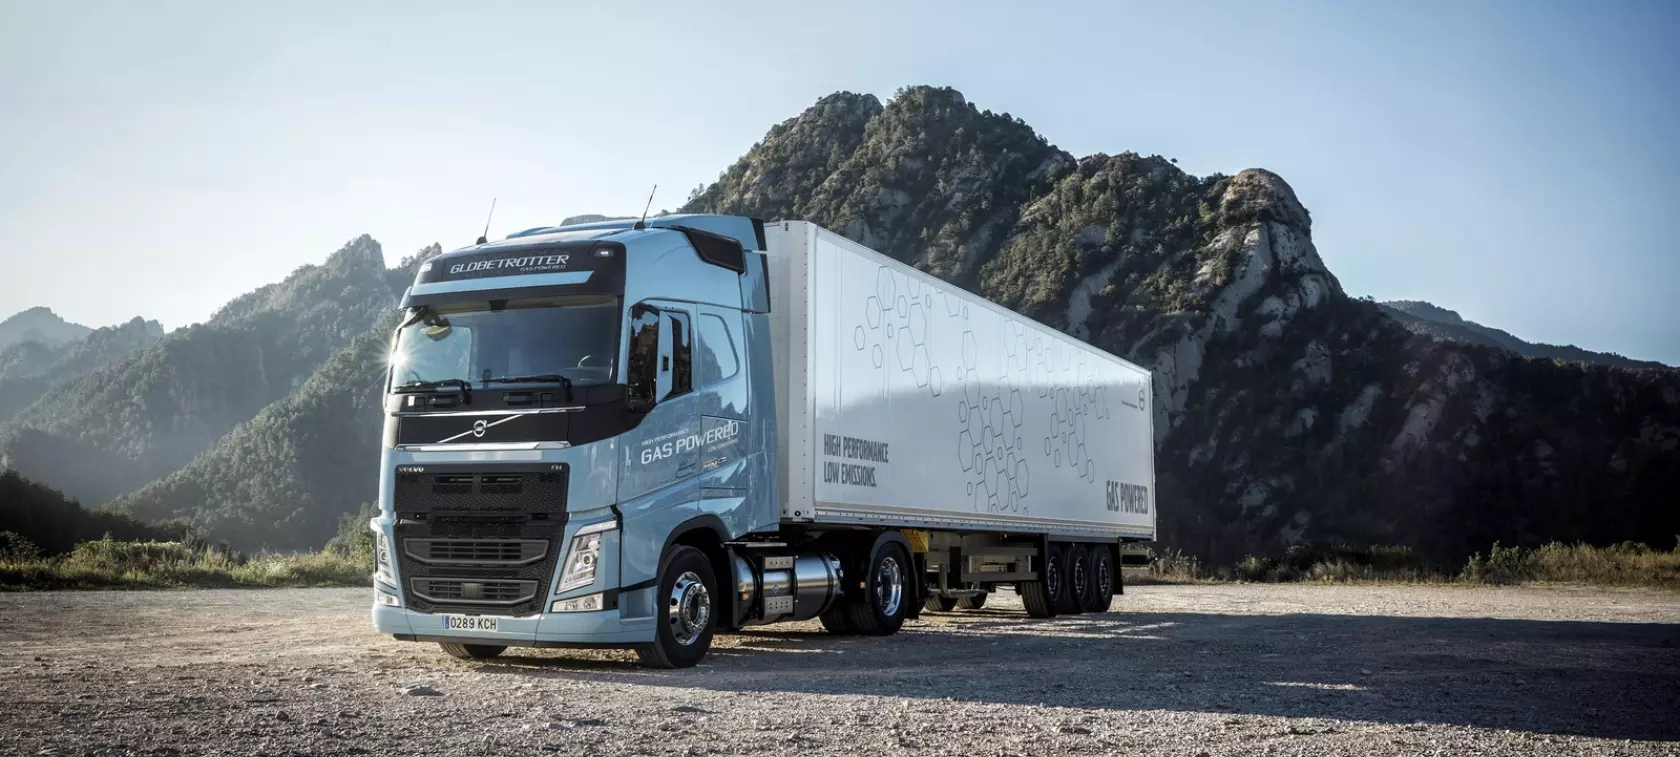 Volvo's new LNG trucks are here